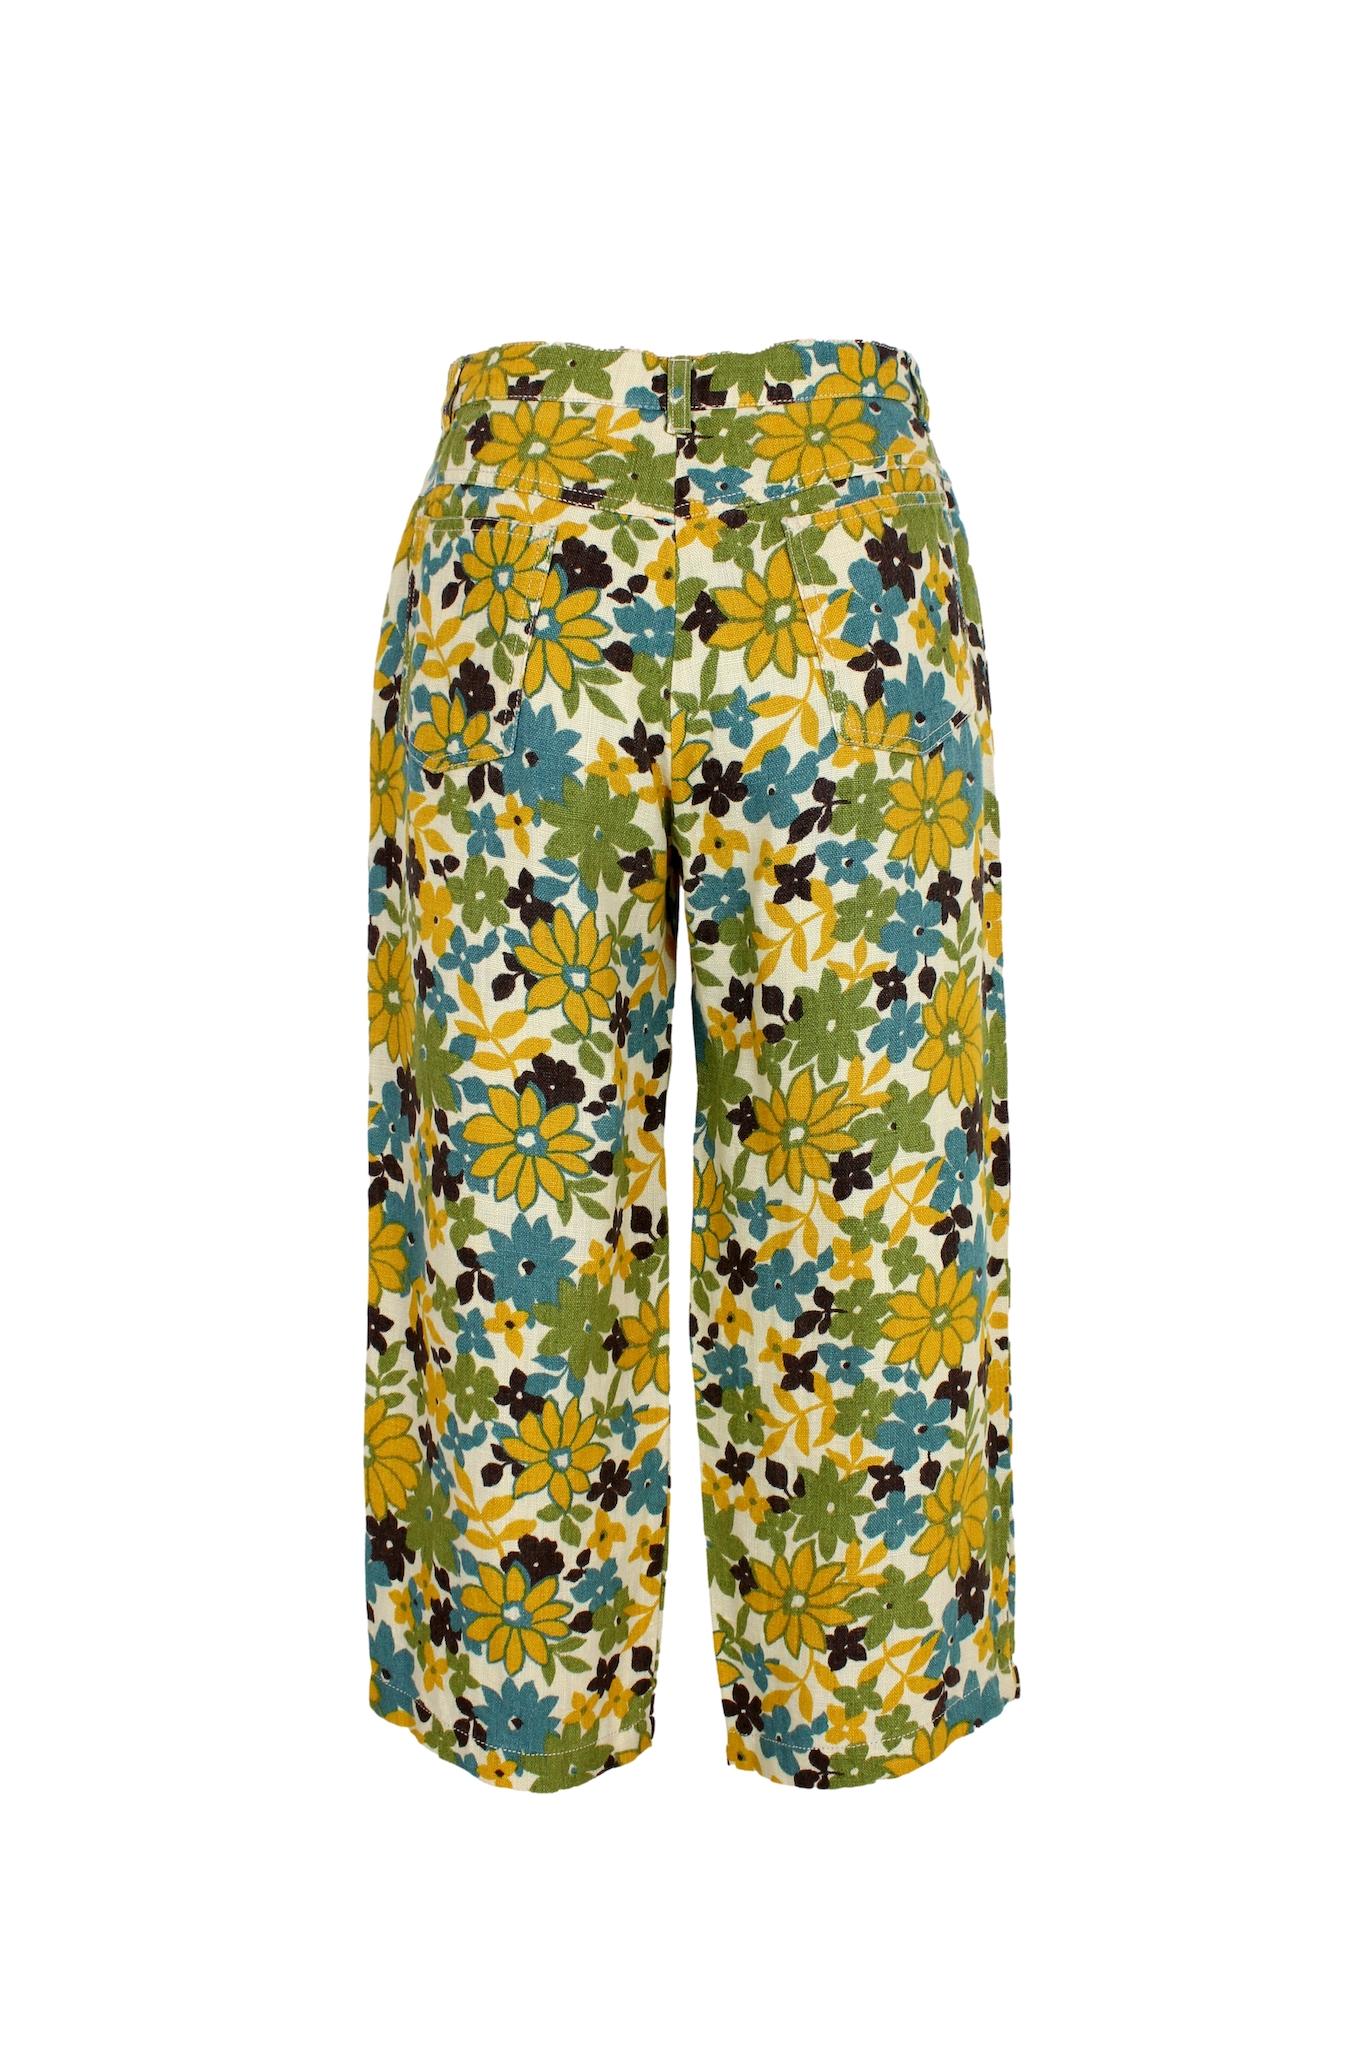 These are vintage 2000s Capri trousers from Max Mara. The trousers feature a beautiful floral pattern in shades of yellow, blue, and beige, adding a touch of elegance to your outfit. They are made of high-quality linen, which is perfect for warm